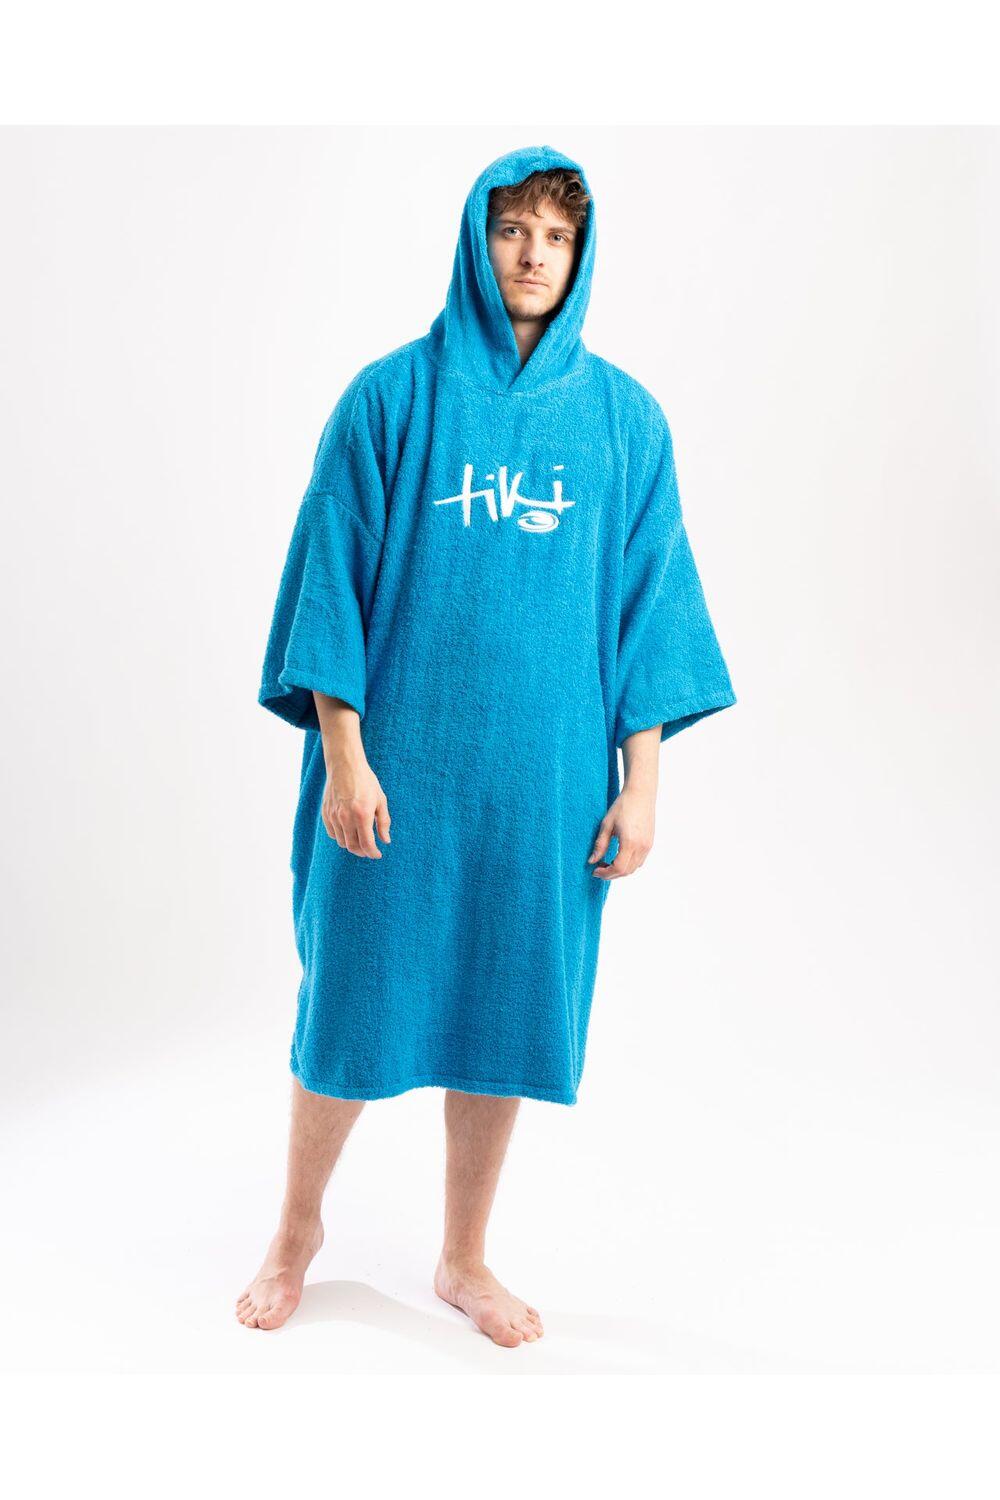 Adults Hooded Change Robe - Blue 4/7